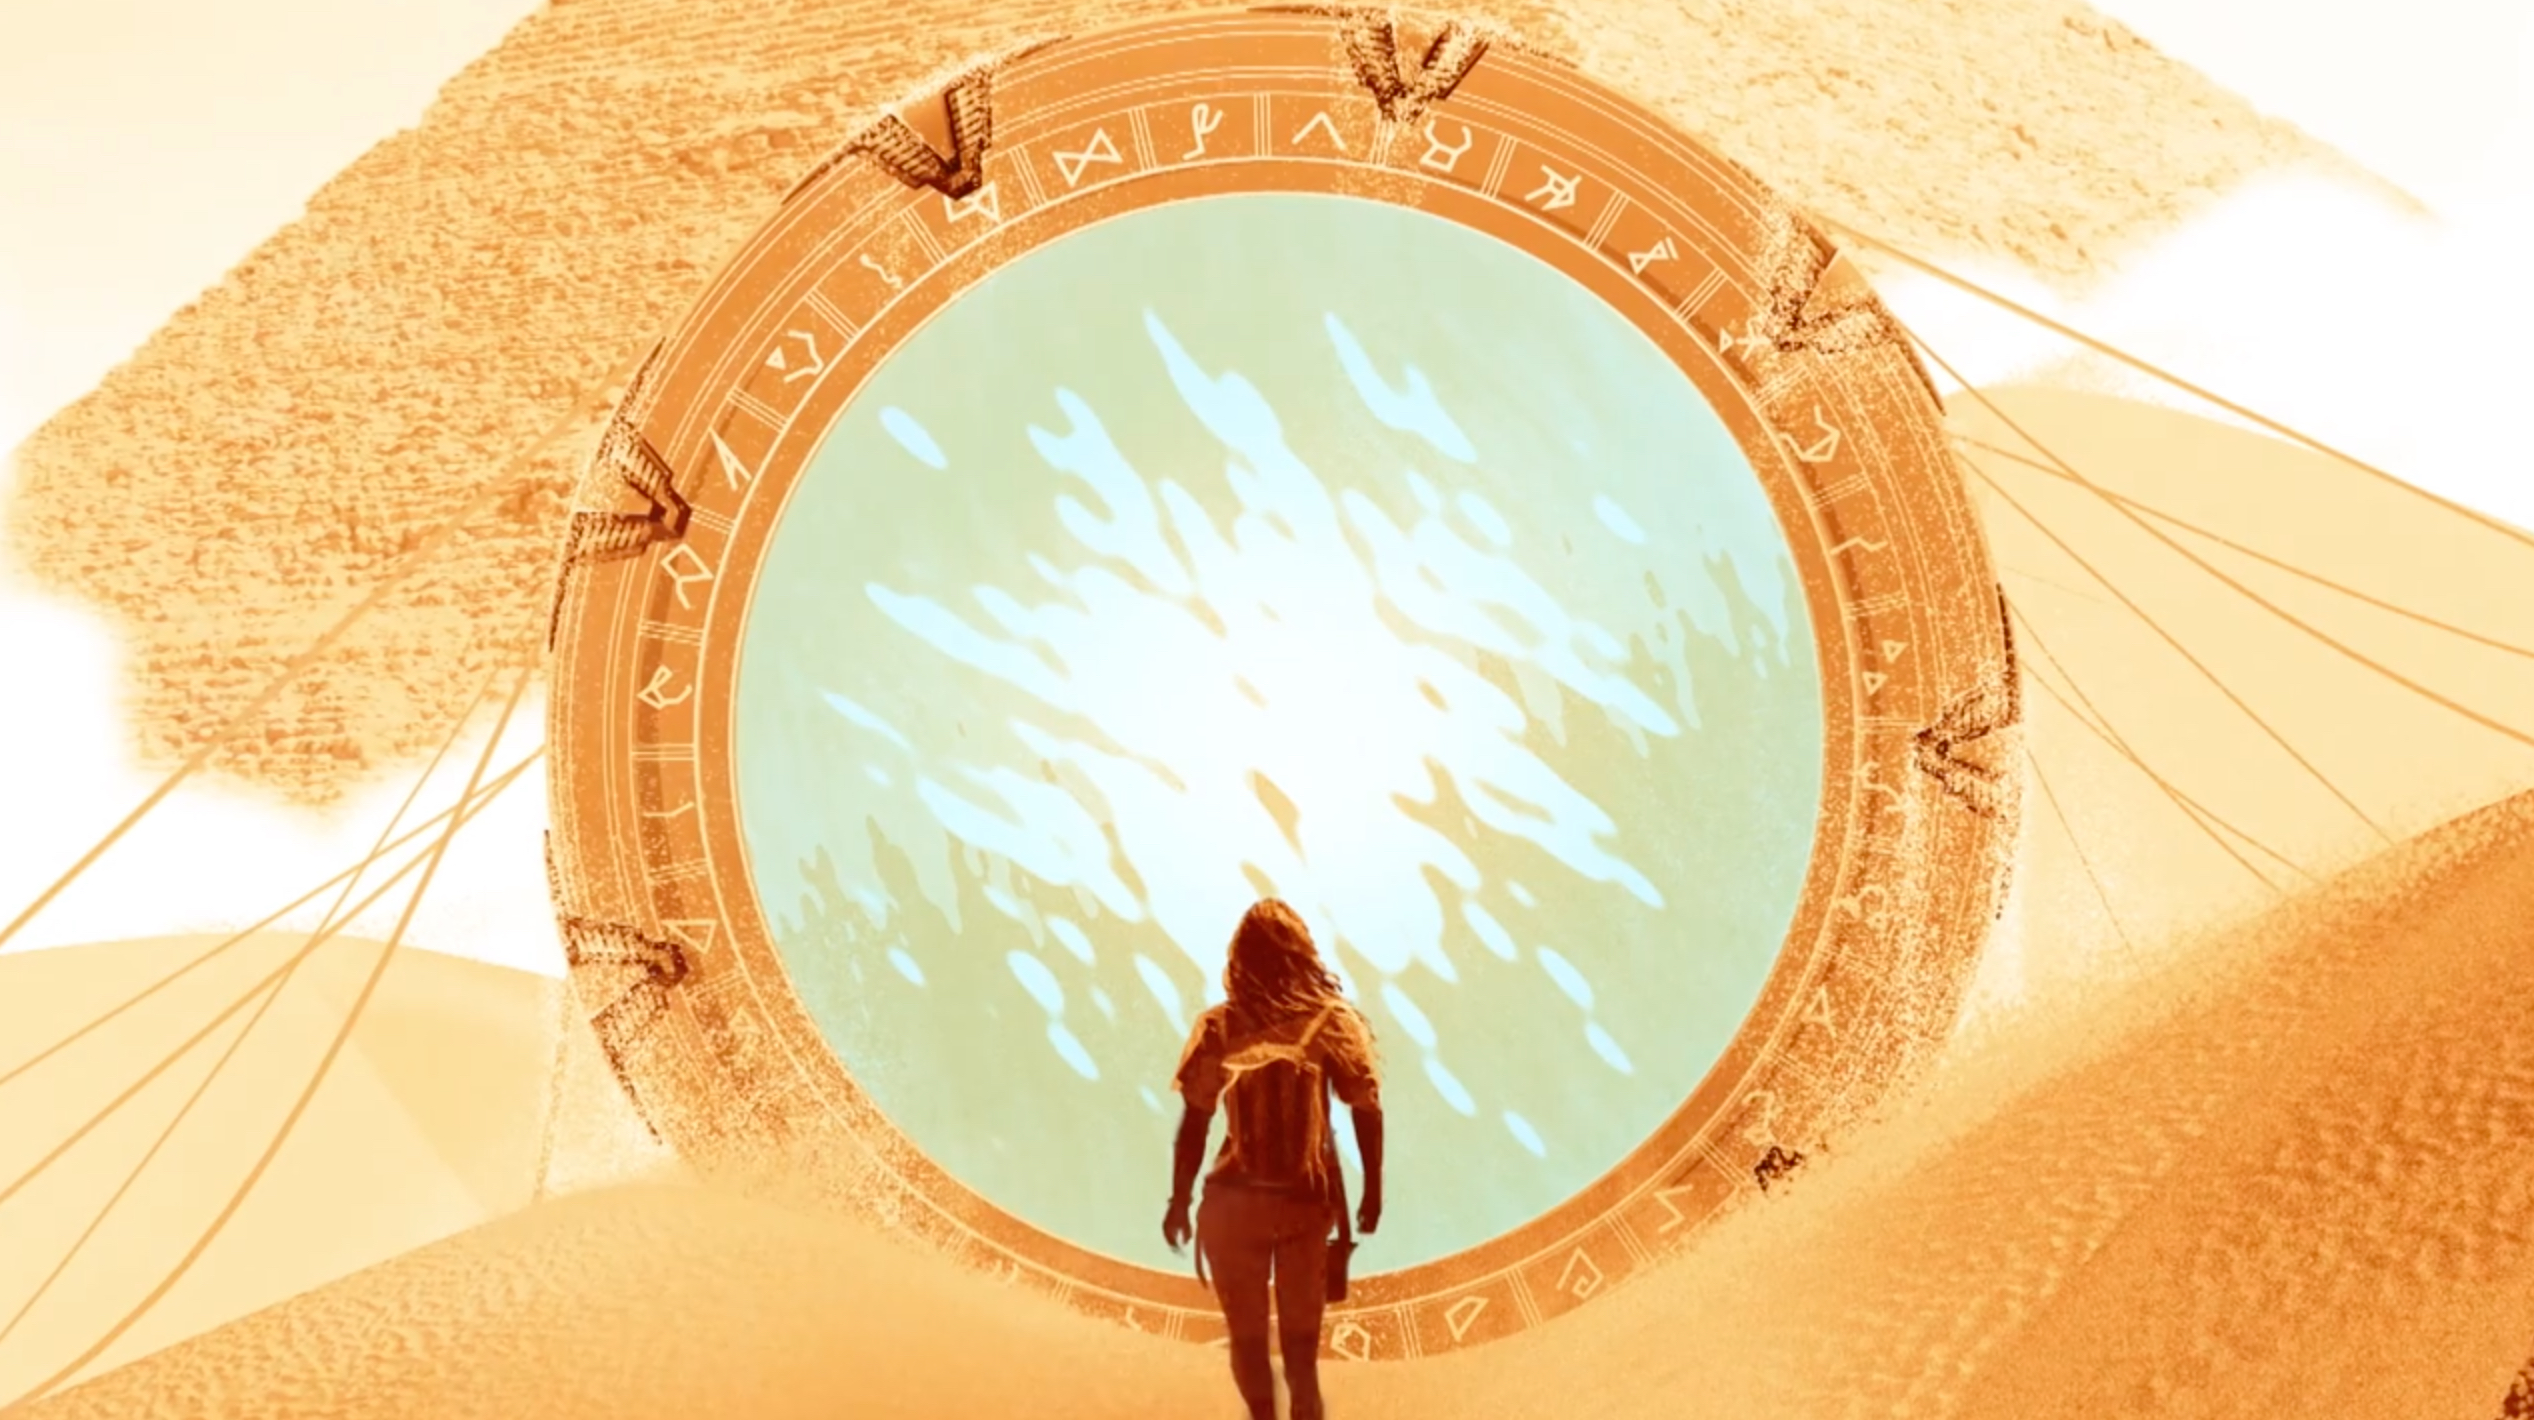 The Ultimate Guide To Stargate